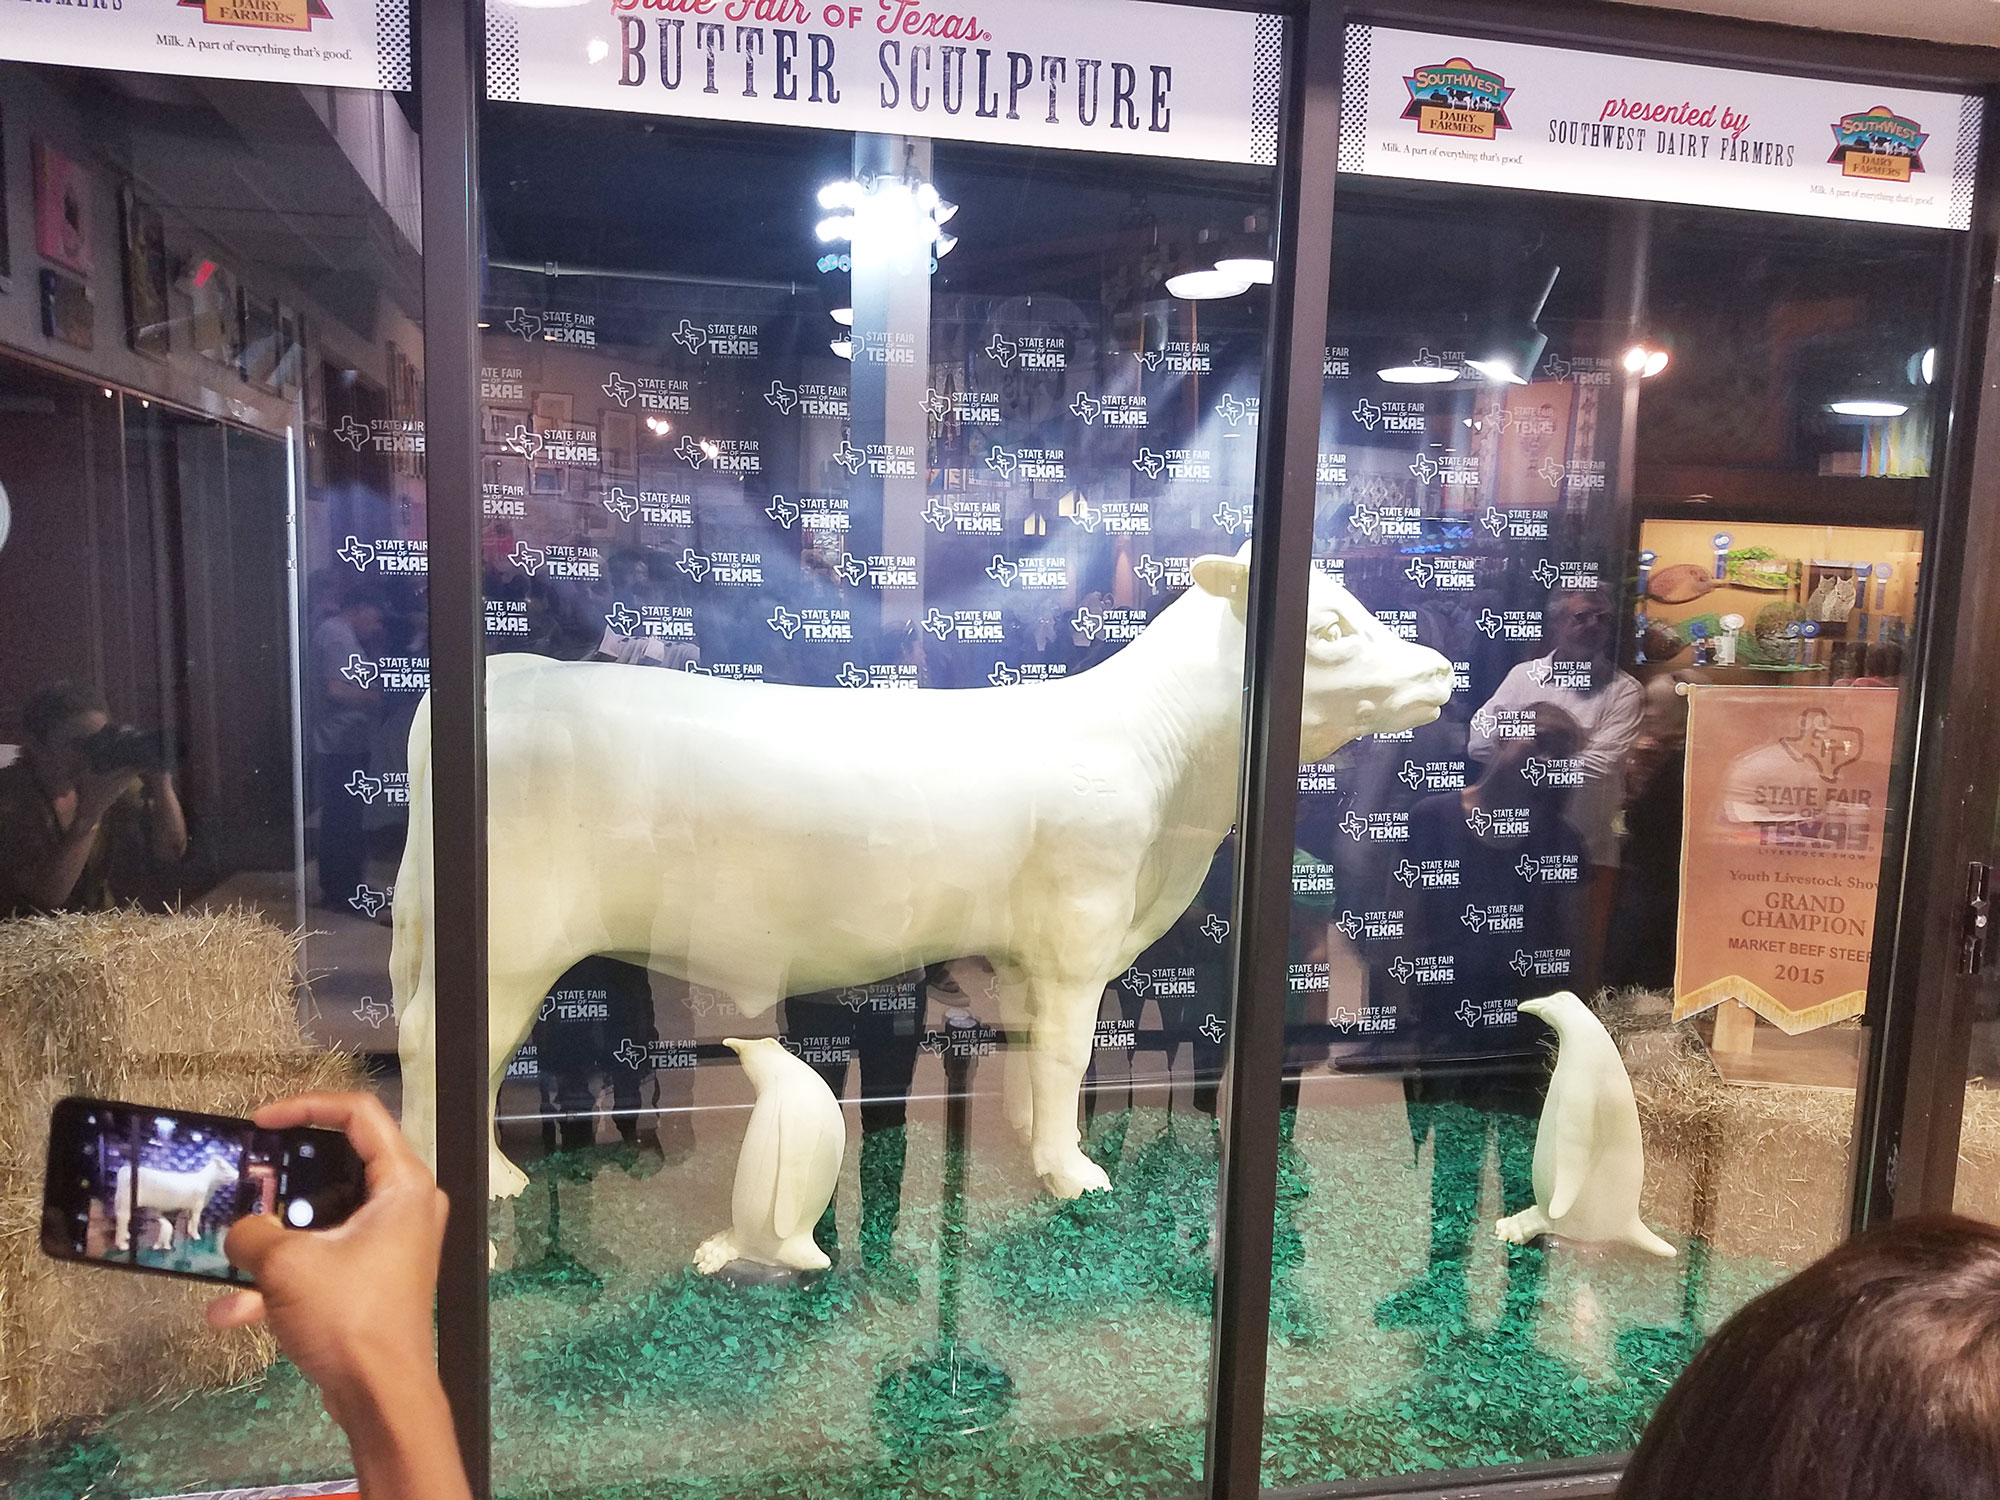 State Fair of Texas butter sculptures. Why are the penguins eyeing the cow?